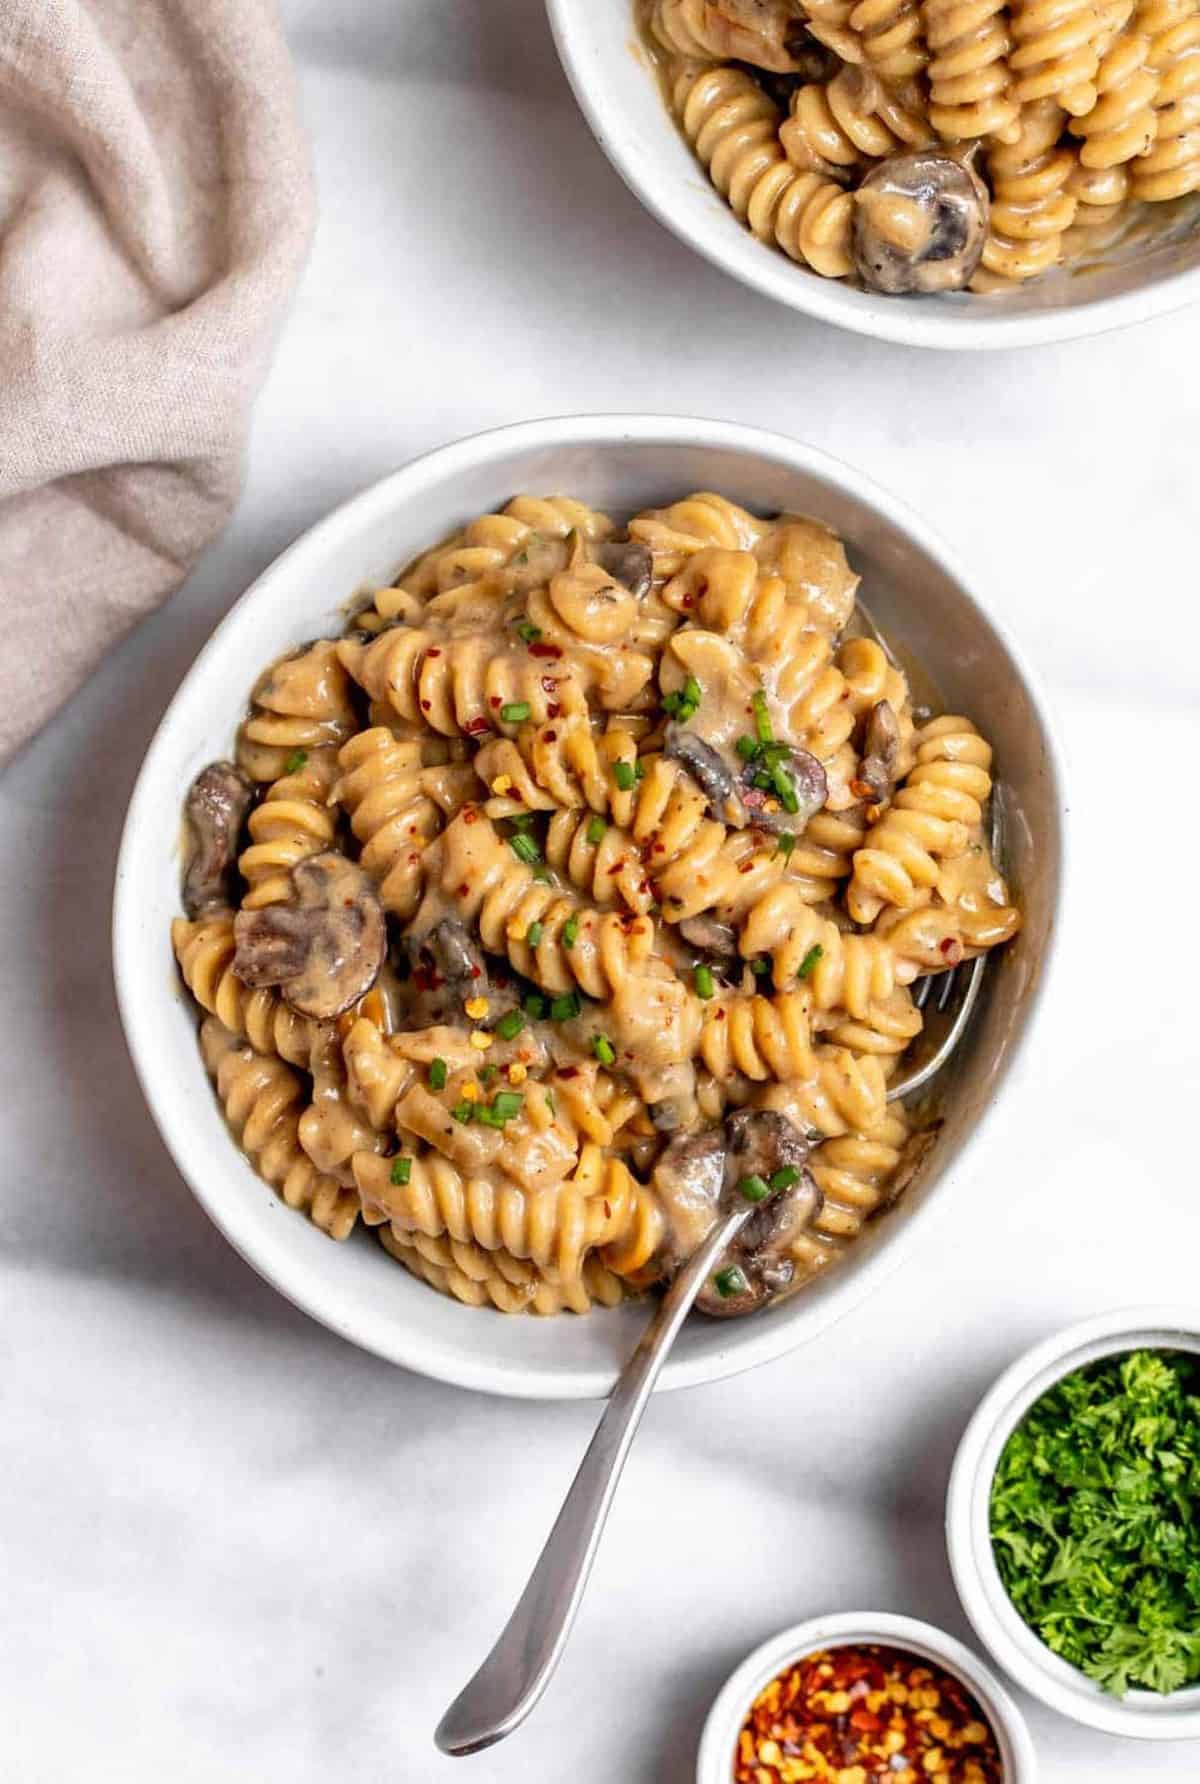 Vegan mushroom stroganoff in a bowl with a fork on the side.